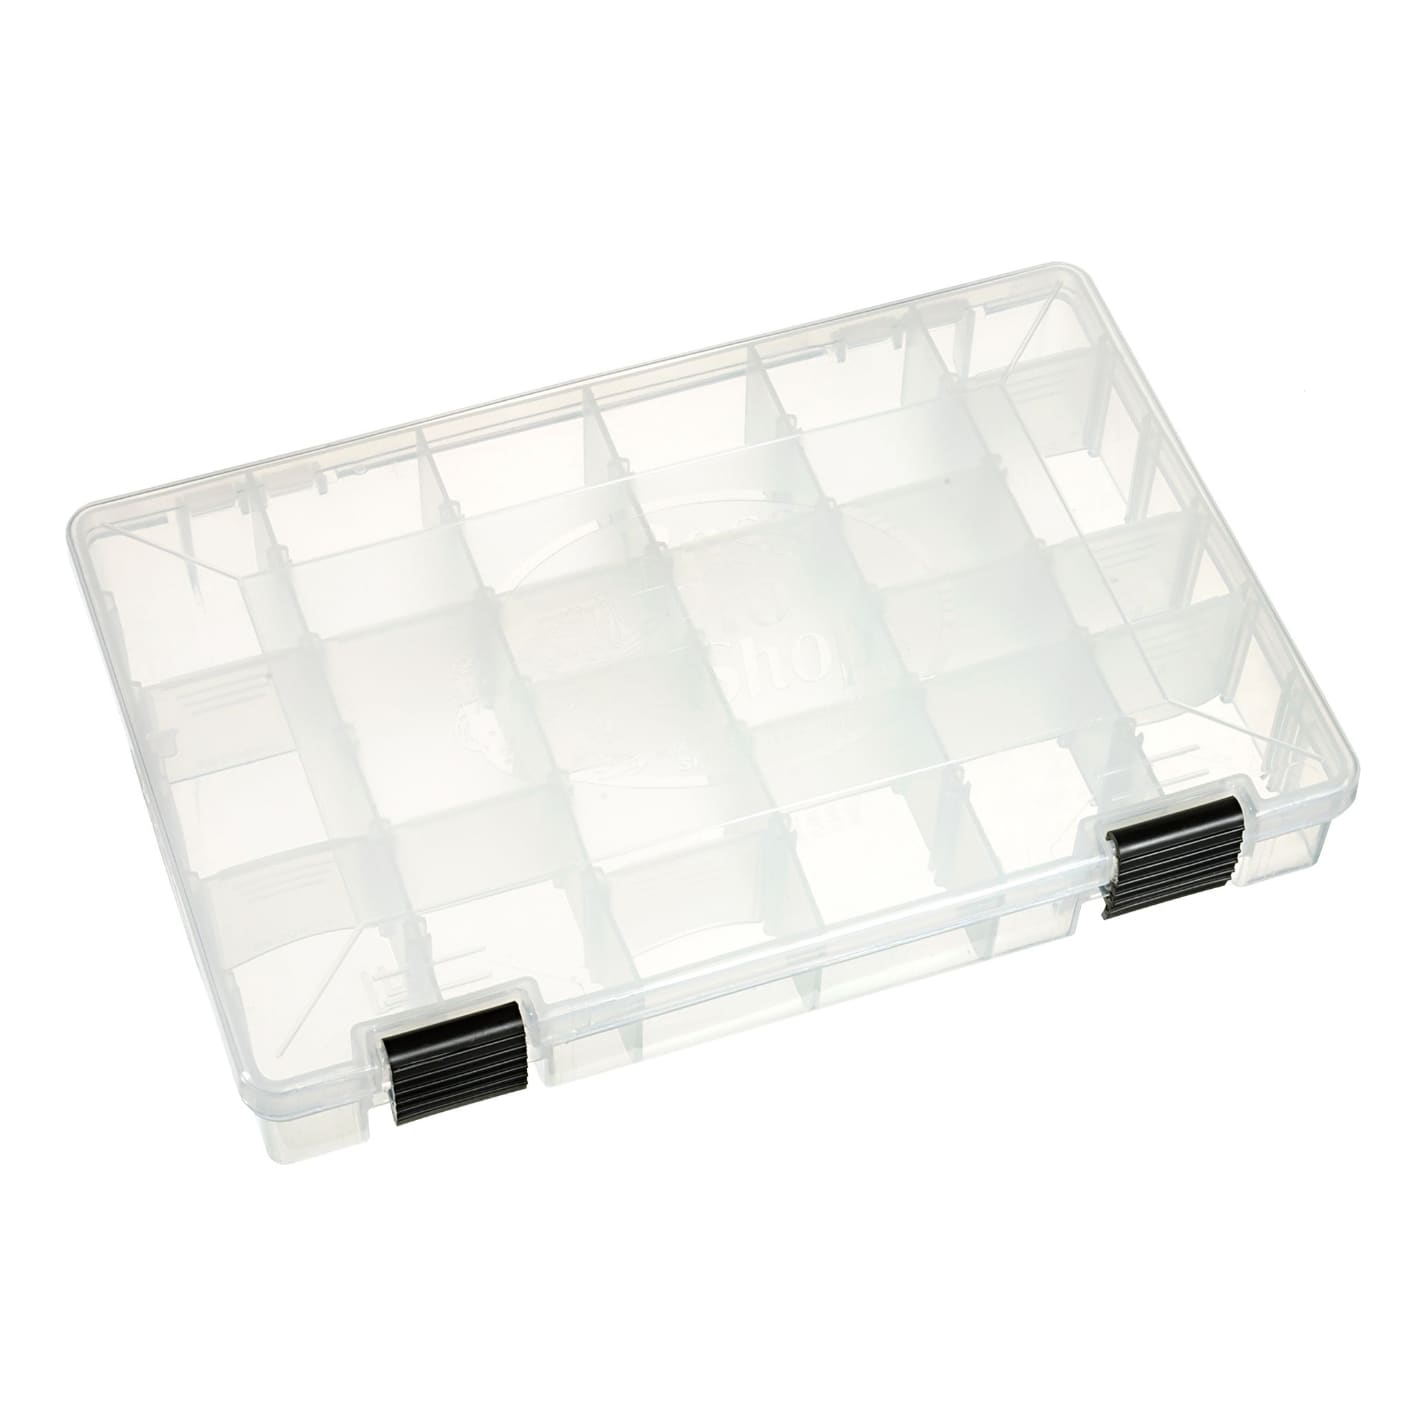 Bass Pro Shops® Tackle Storage Boxes - 360